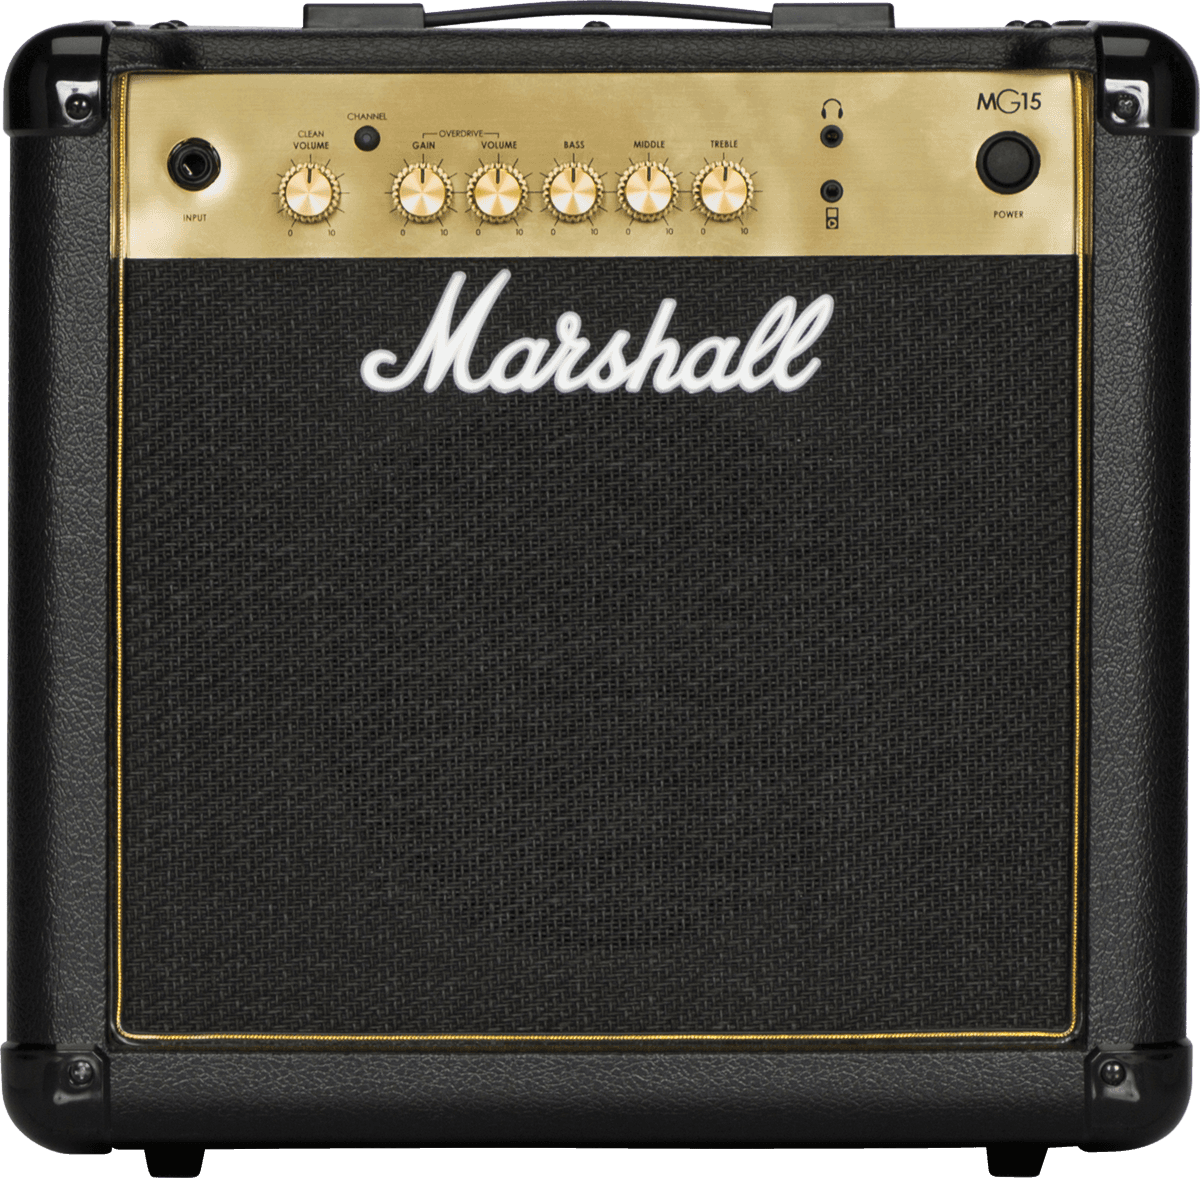 Marshall Mg15g 15w - Ampli Guitare Électrique Combo - Variation 1